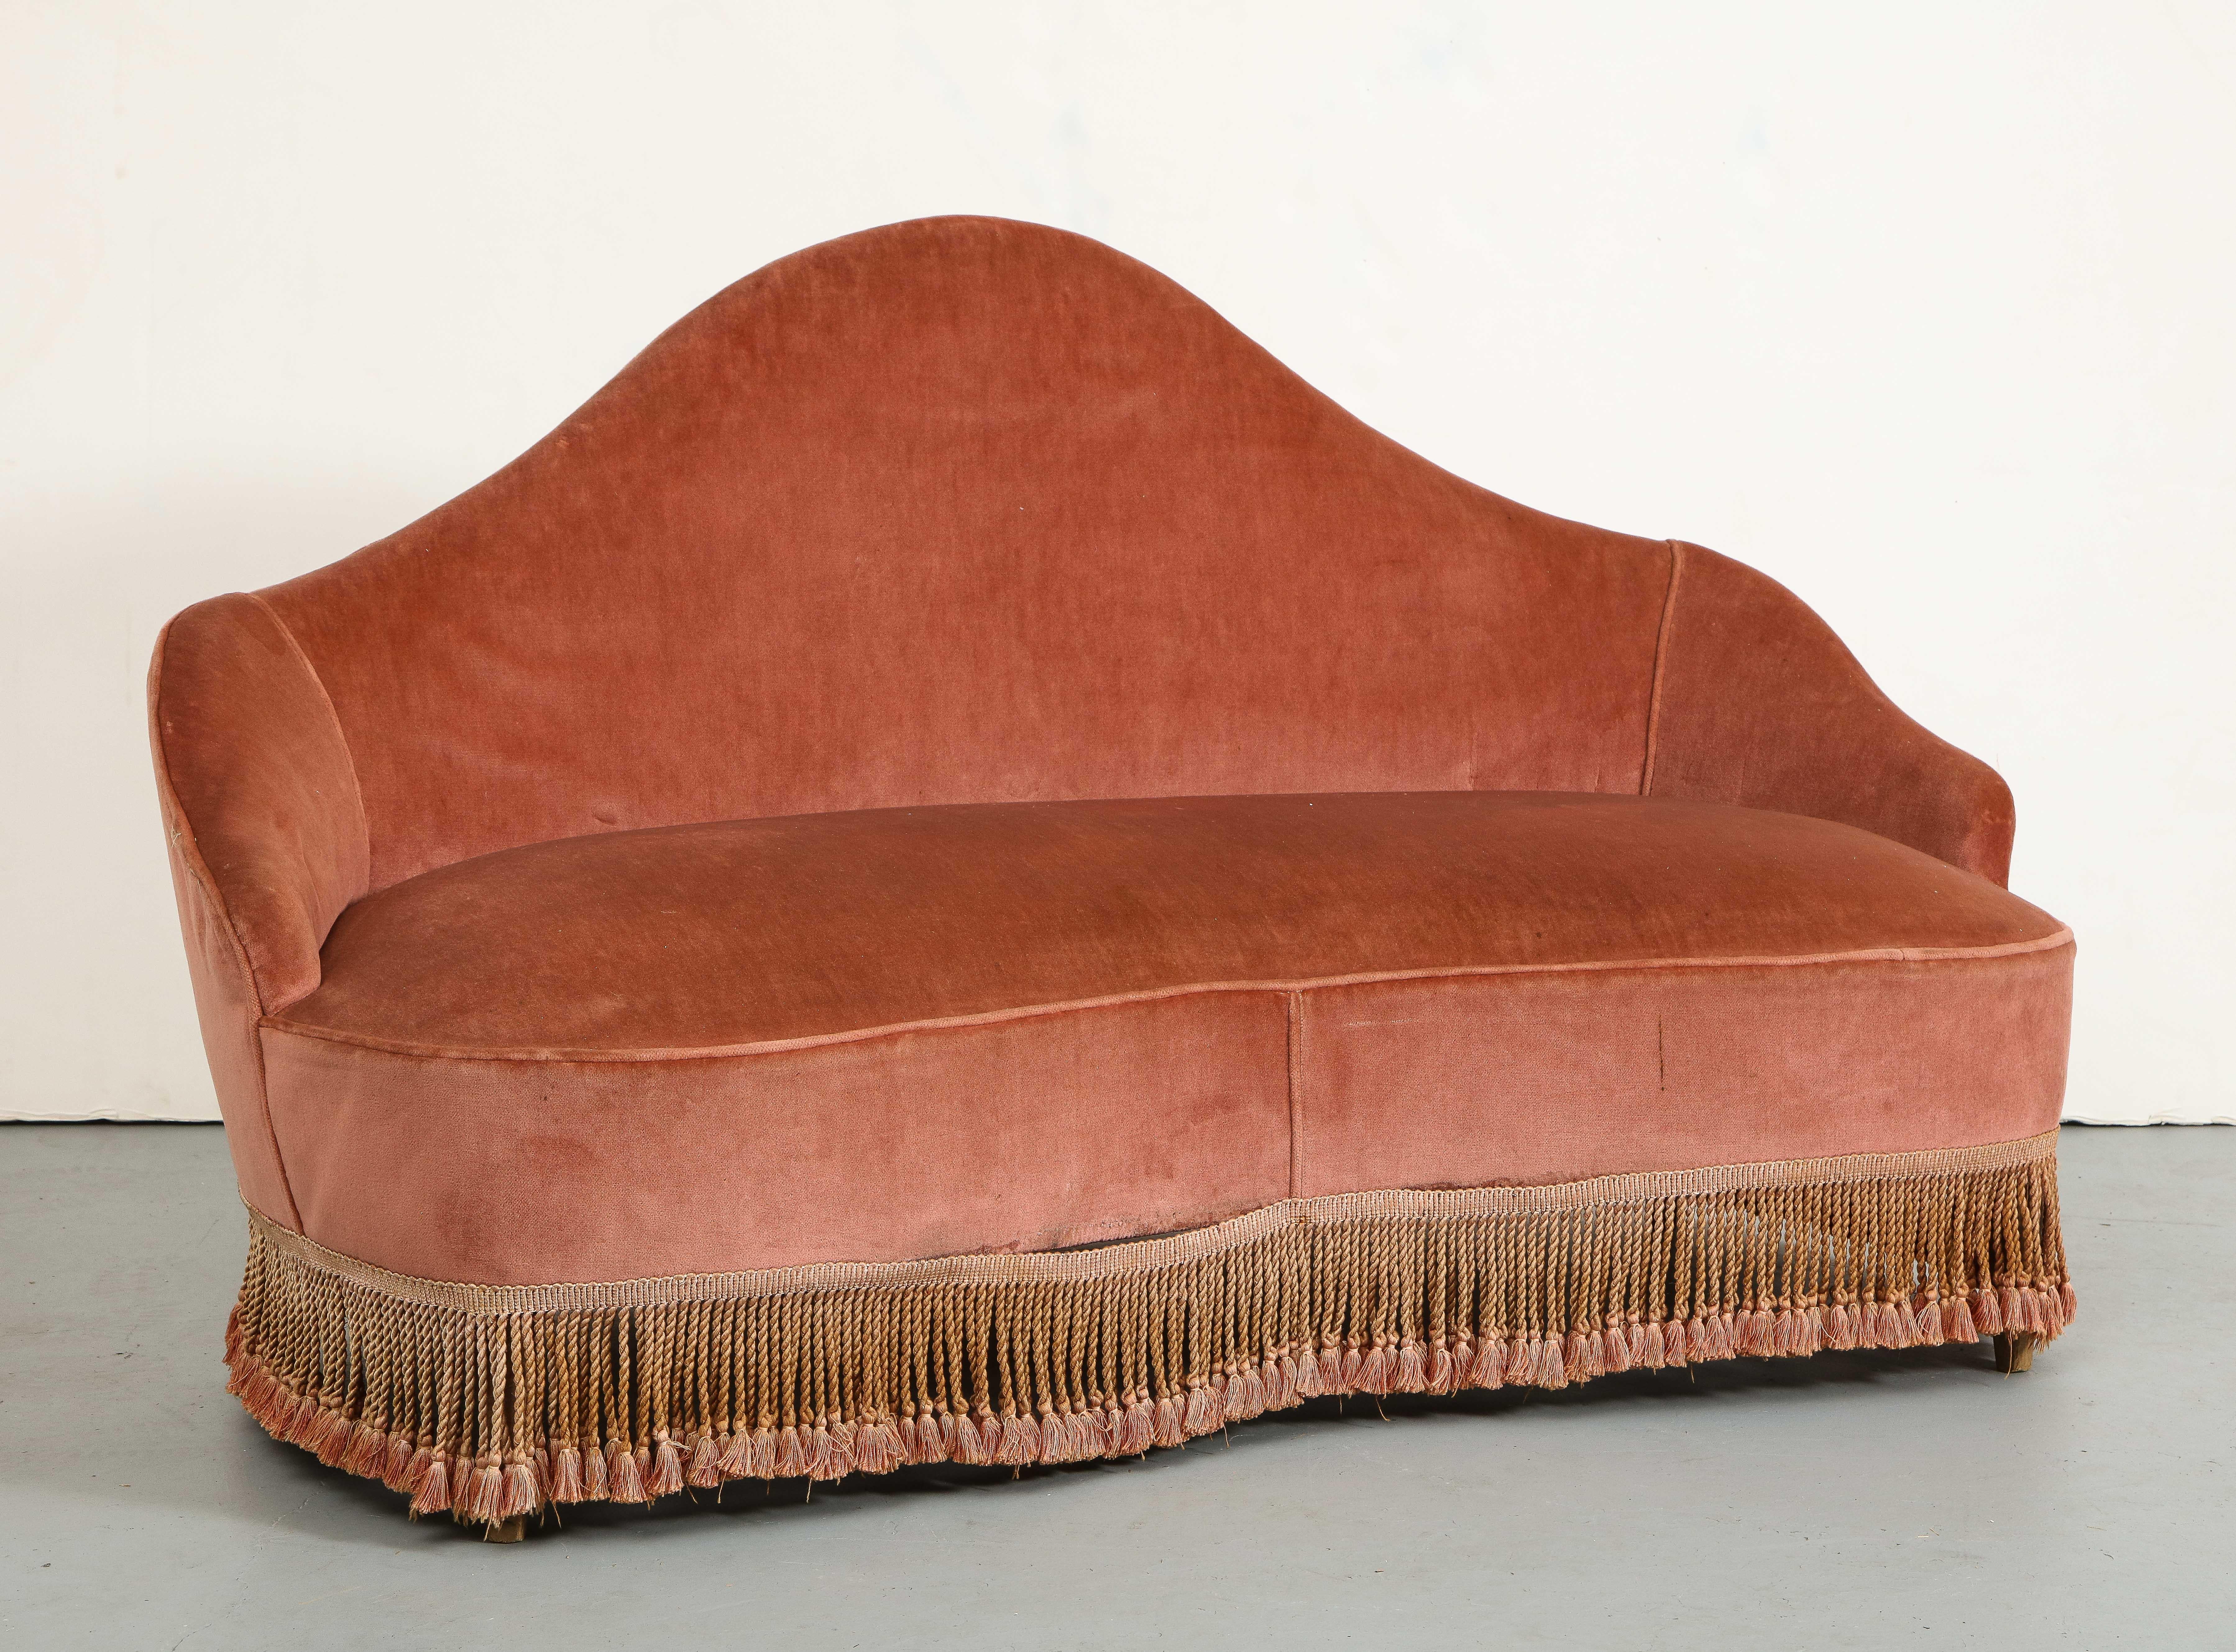 1940s Italian fringed fabric settee attributed to Fede Cheti (1905-1978), in original condition. Padded fabric back. Wood legs hidden by fringe.